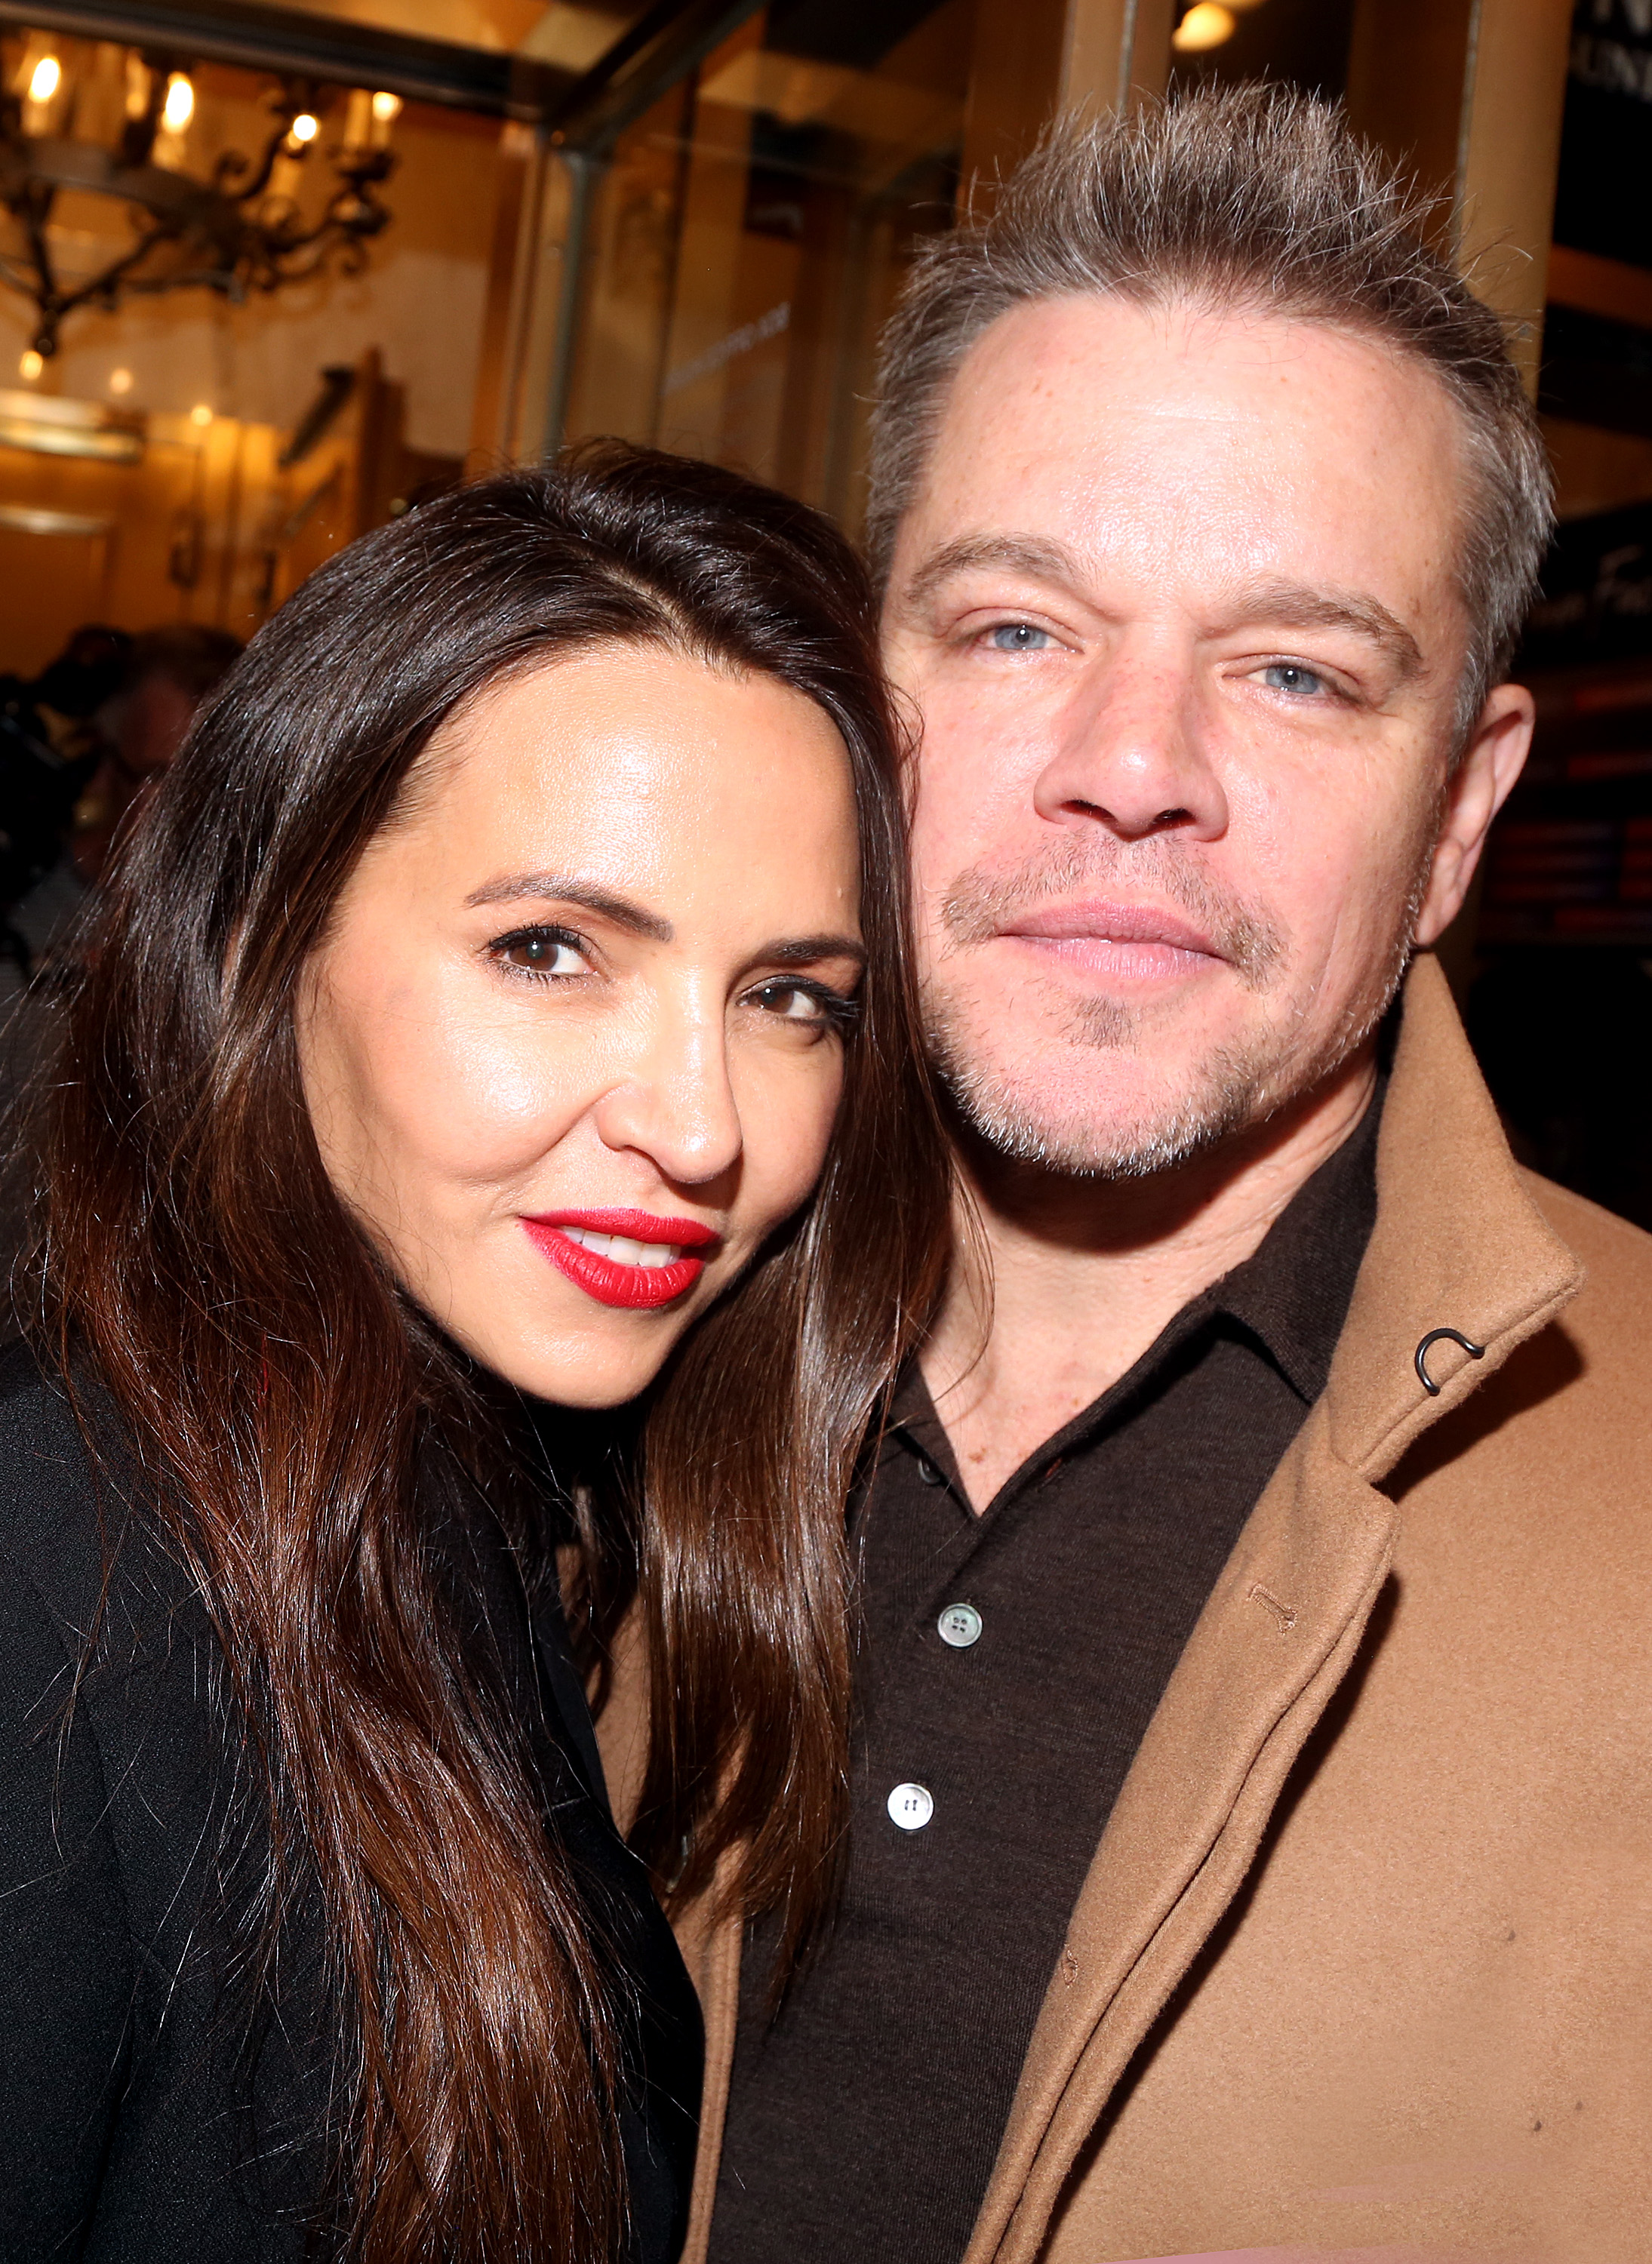 Luciana Barroso Damon and Matt Damon on April 23, 2023 in New York City. | Source: Getty Images